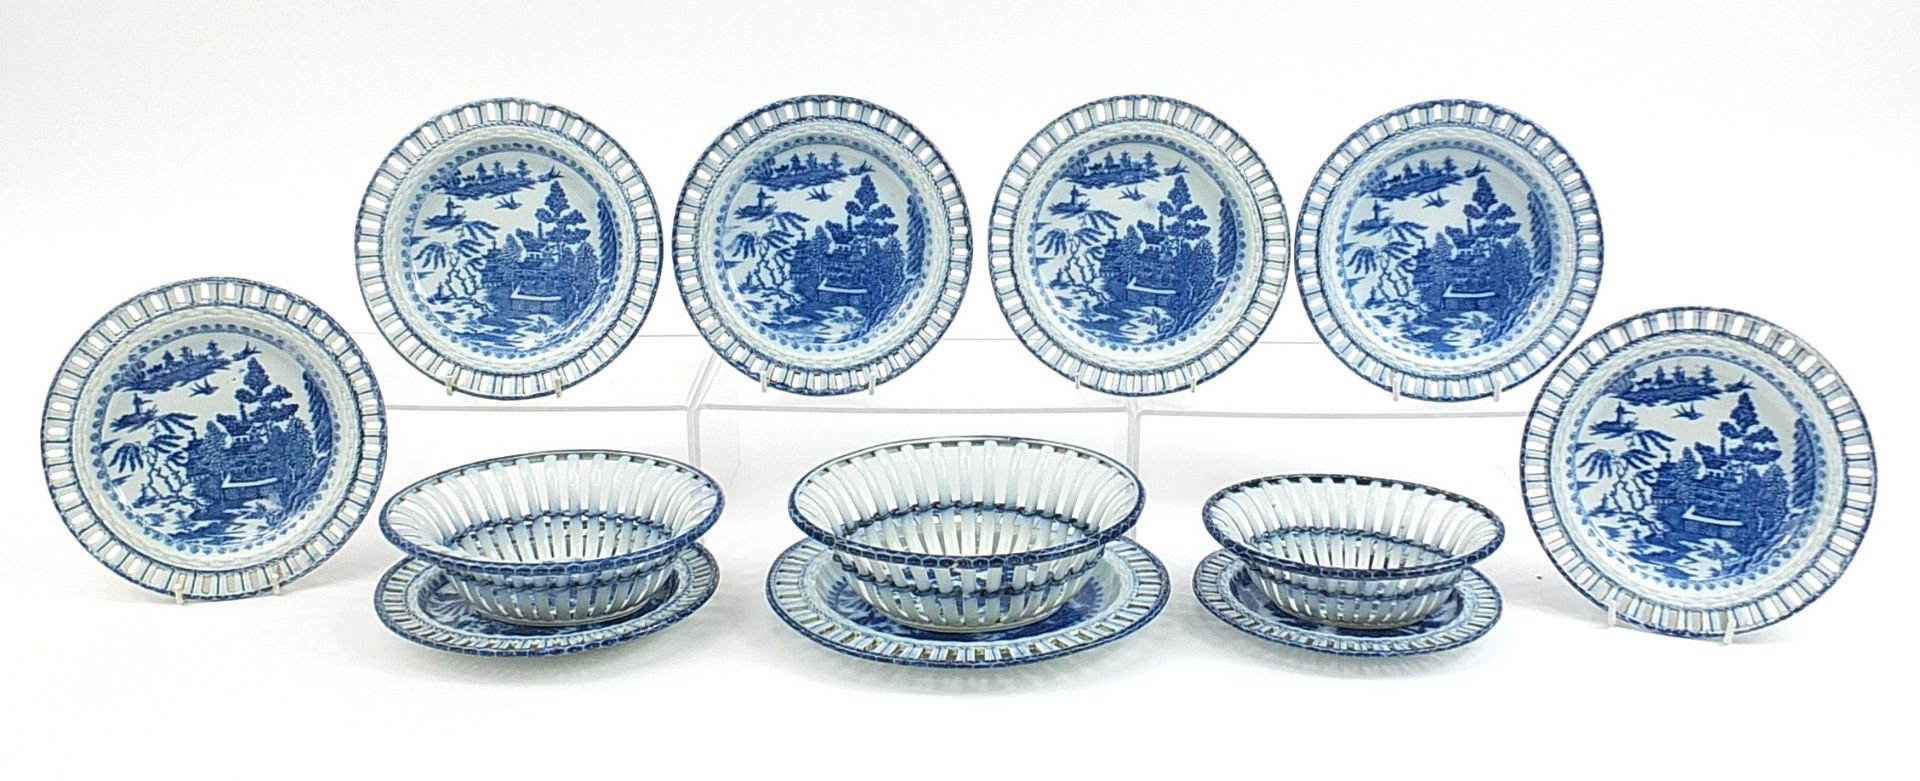 Late 18th century pearlware willow pattern dinner set comprising a graduated set of three baskets